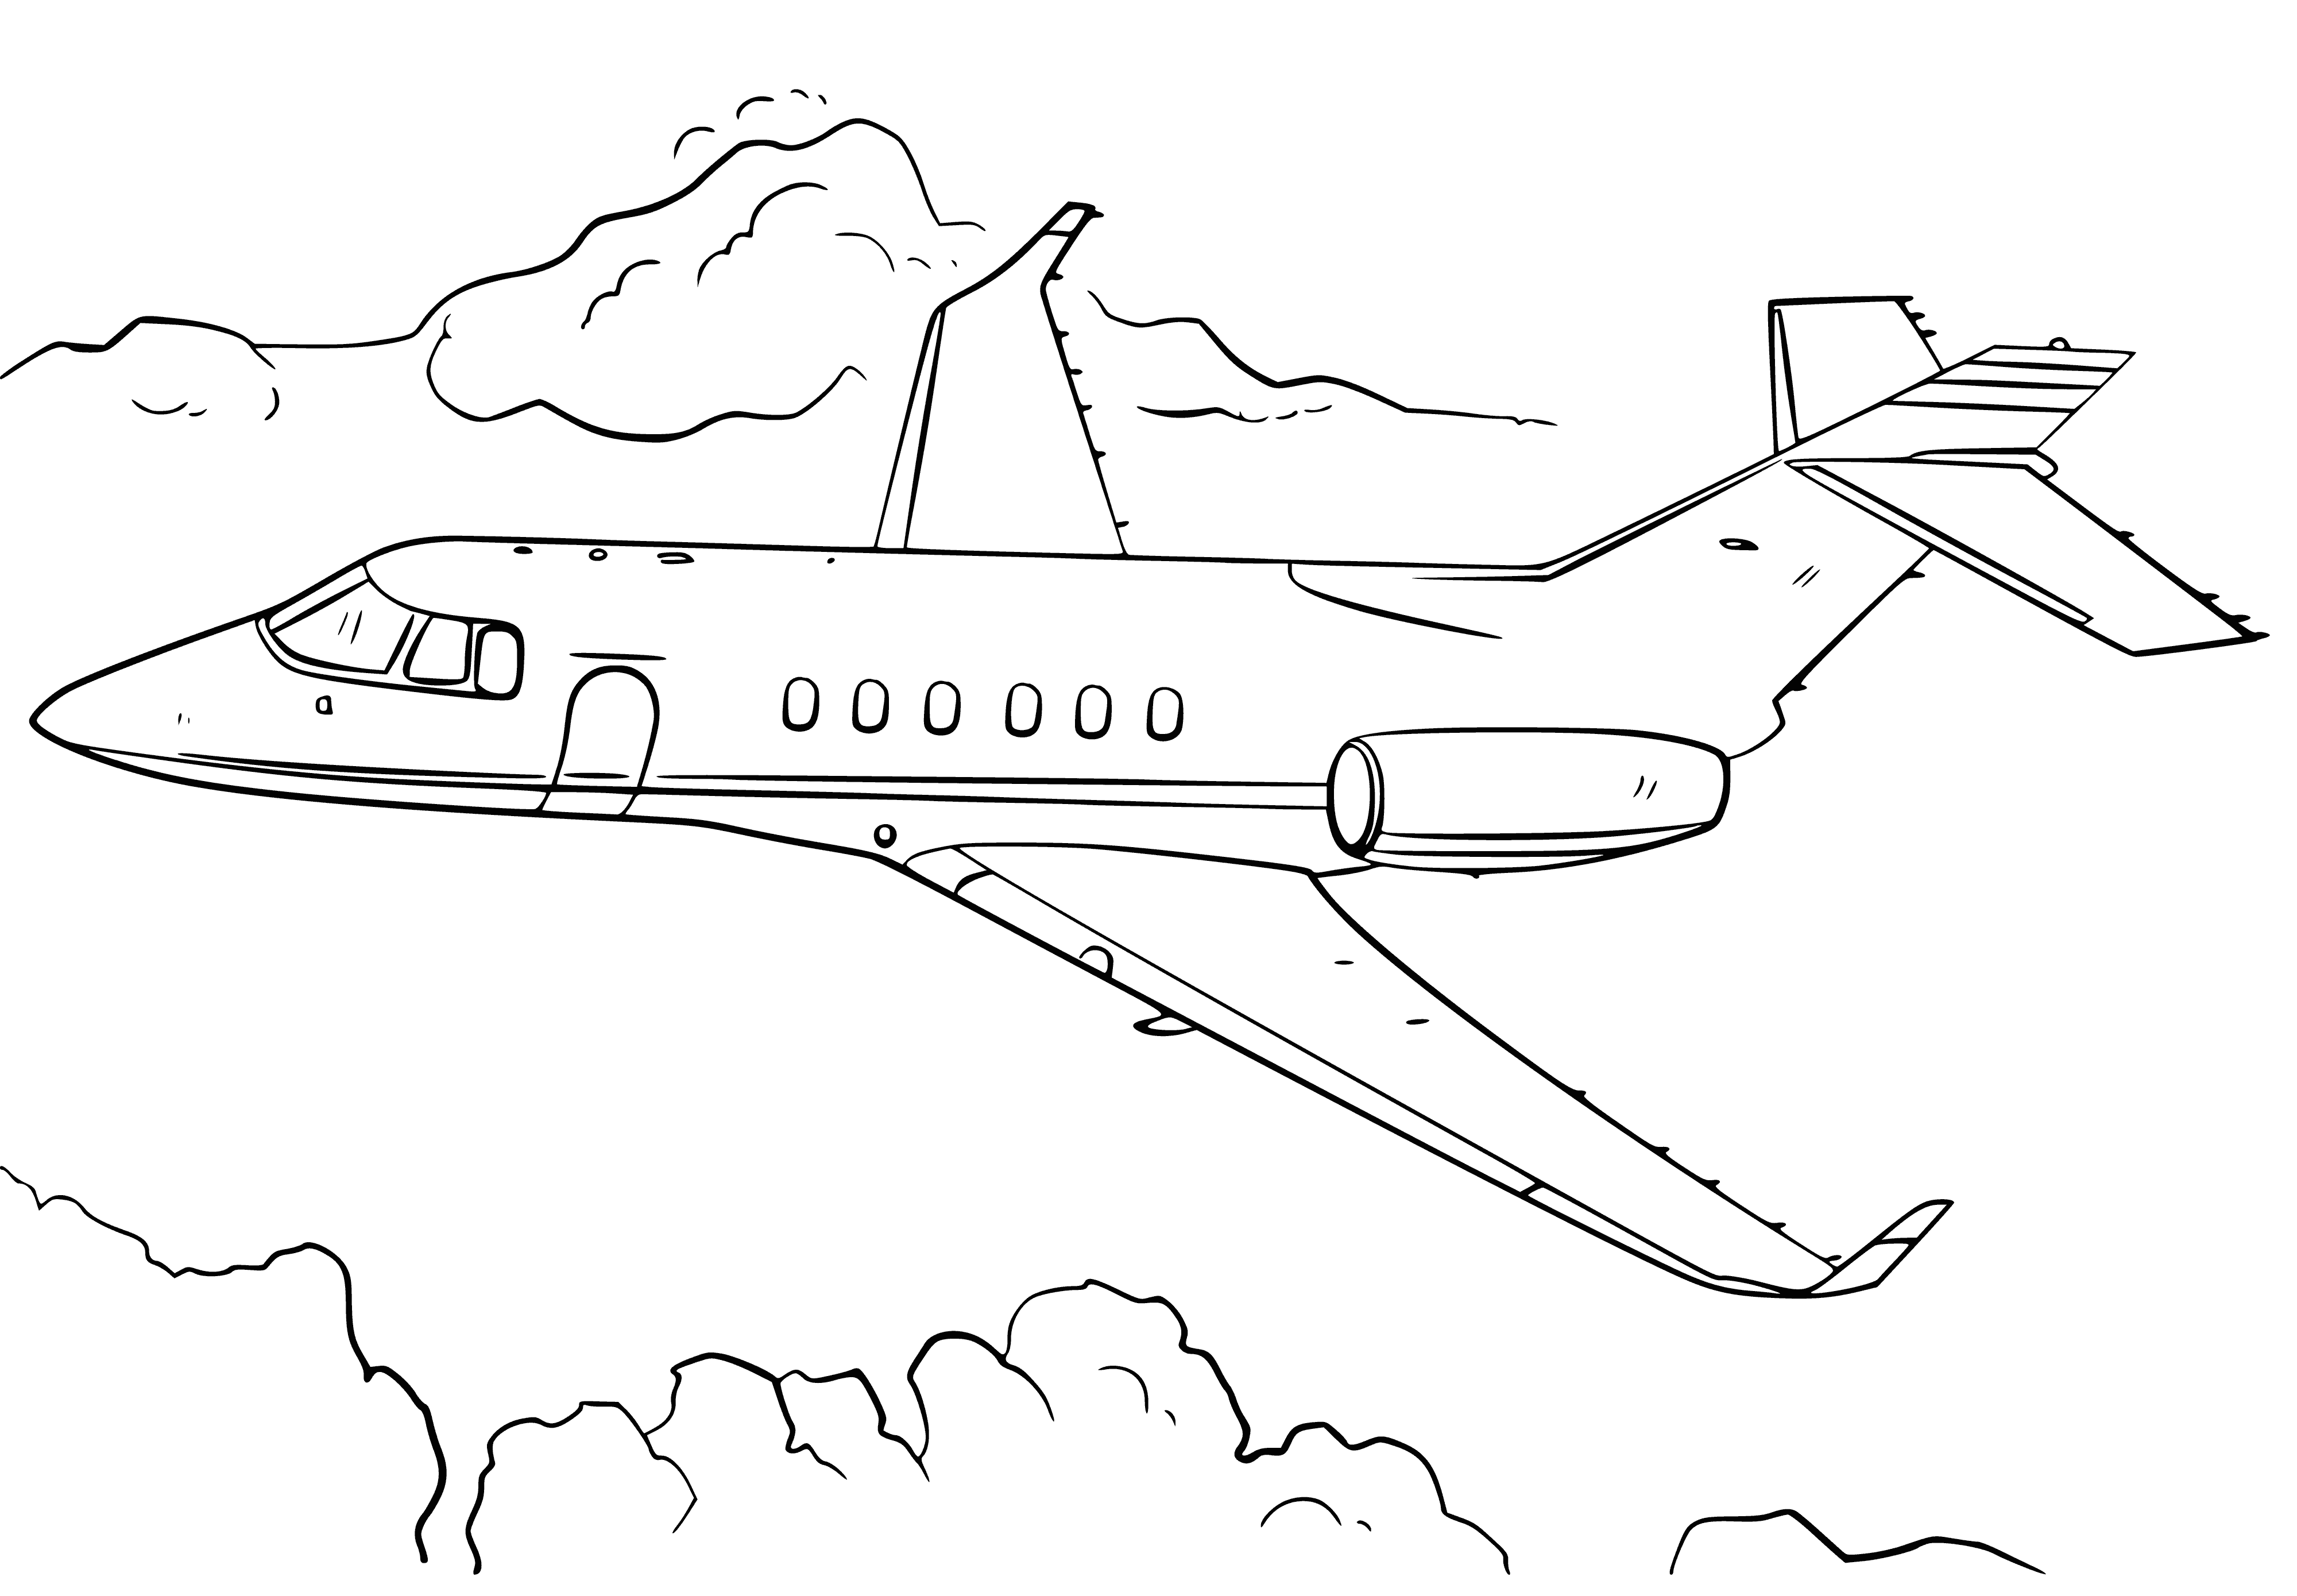 Jet plane in the sky coloring page